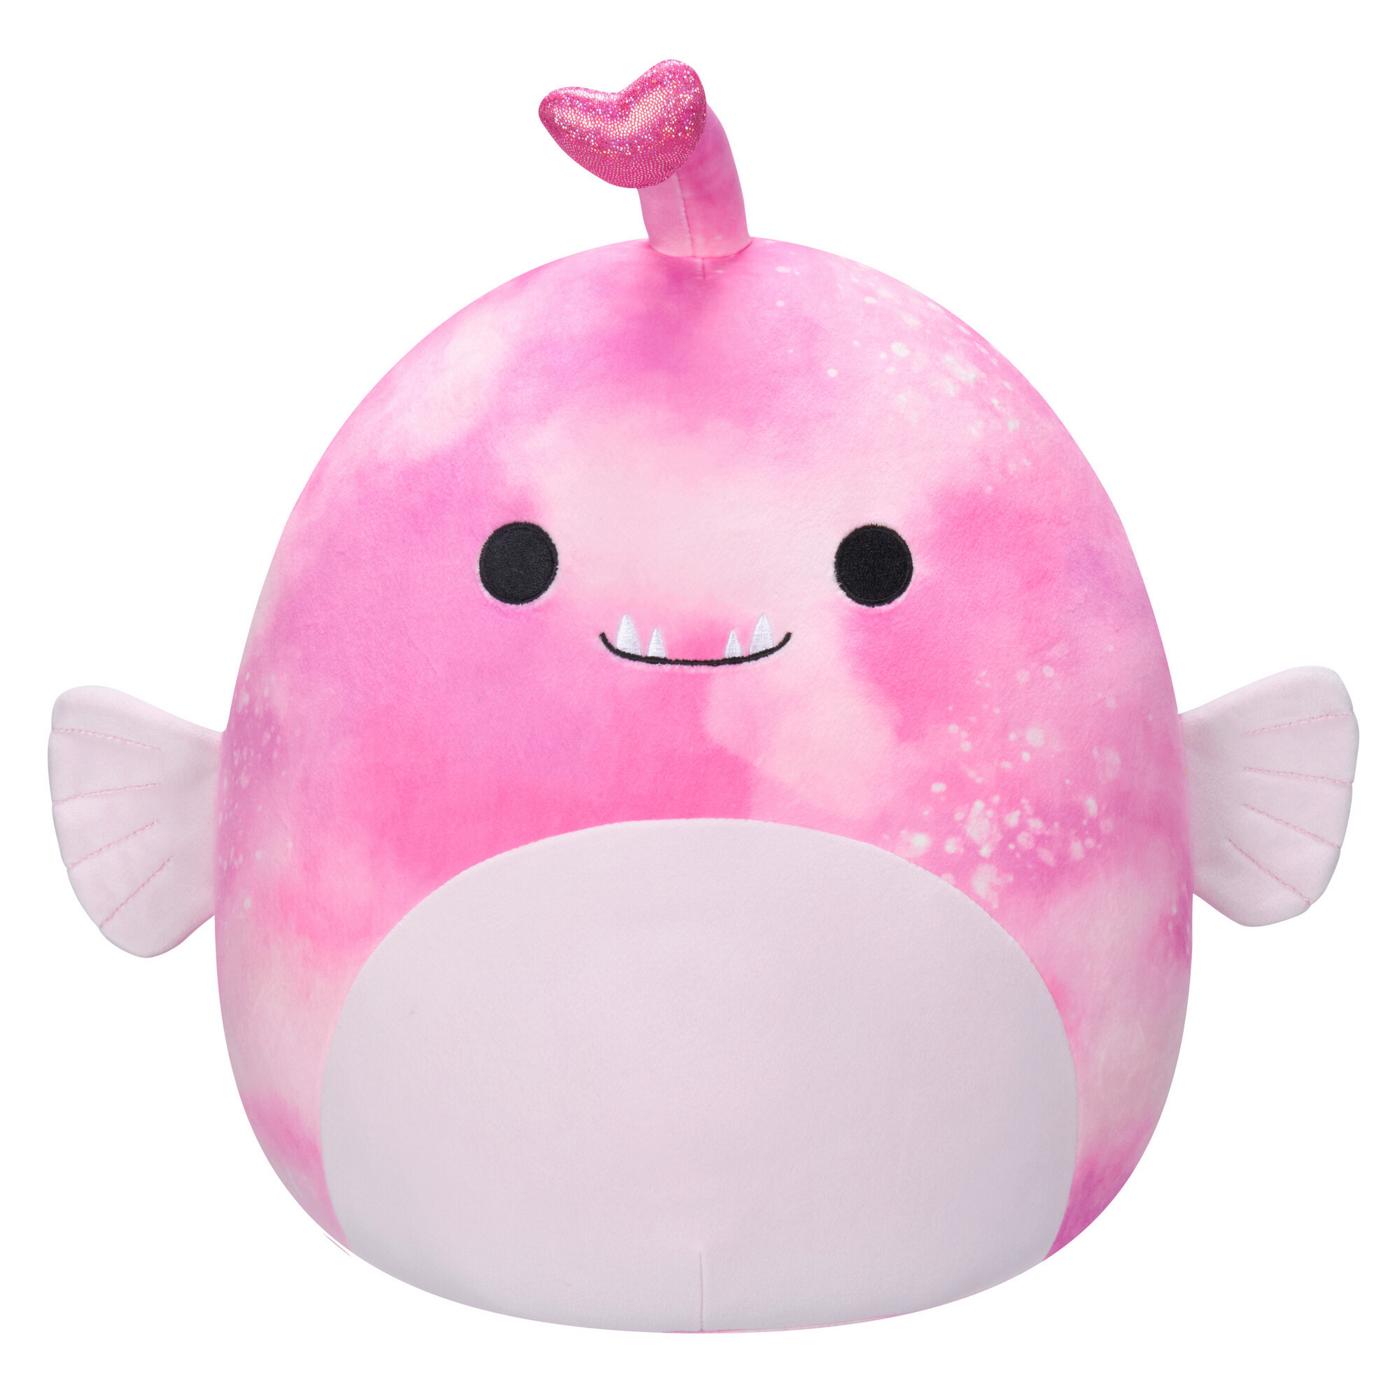 Squishmallows Sy the Pink Angler Fish Valentine's Plush; image 1 of 3